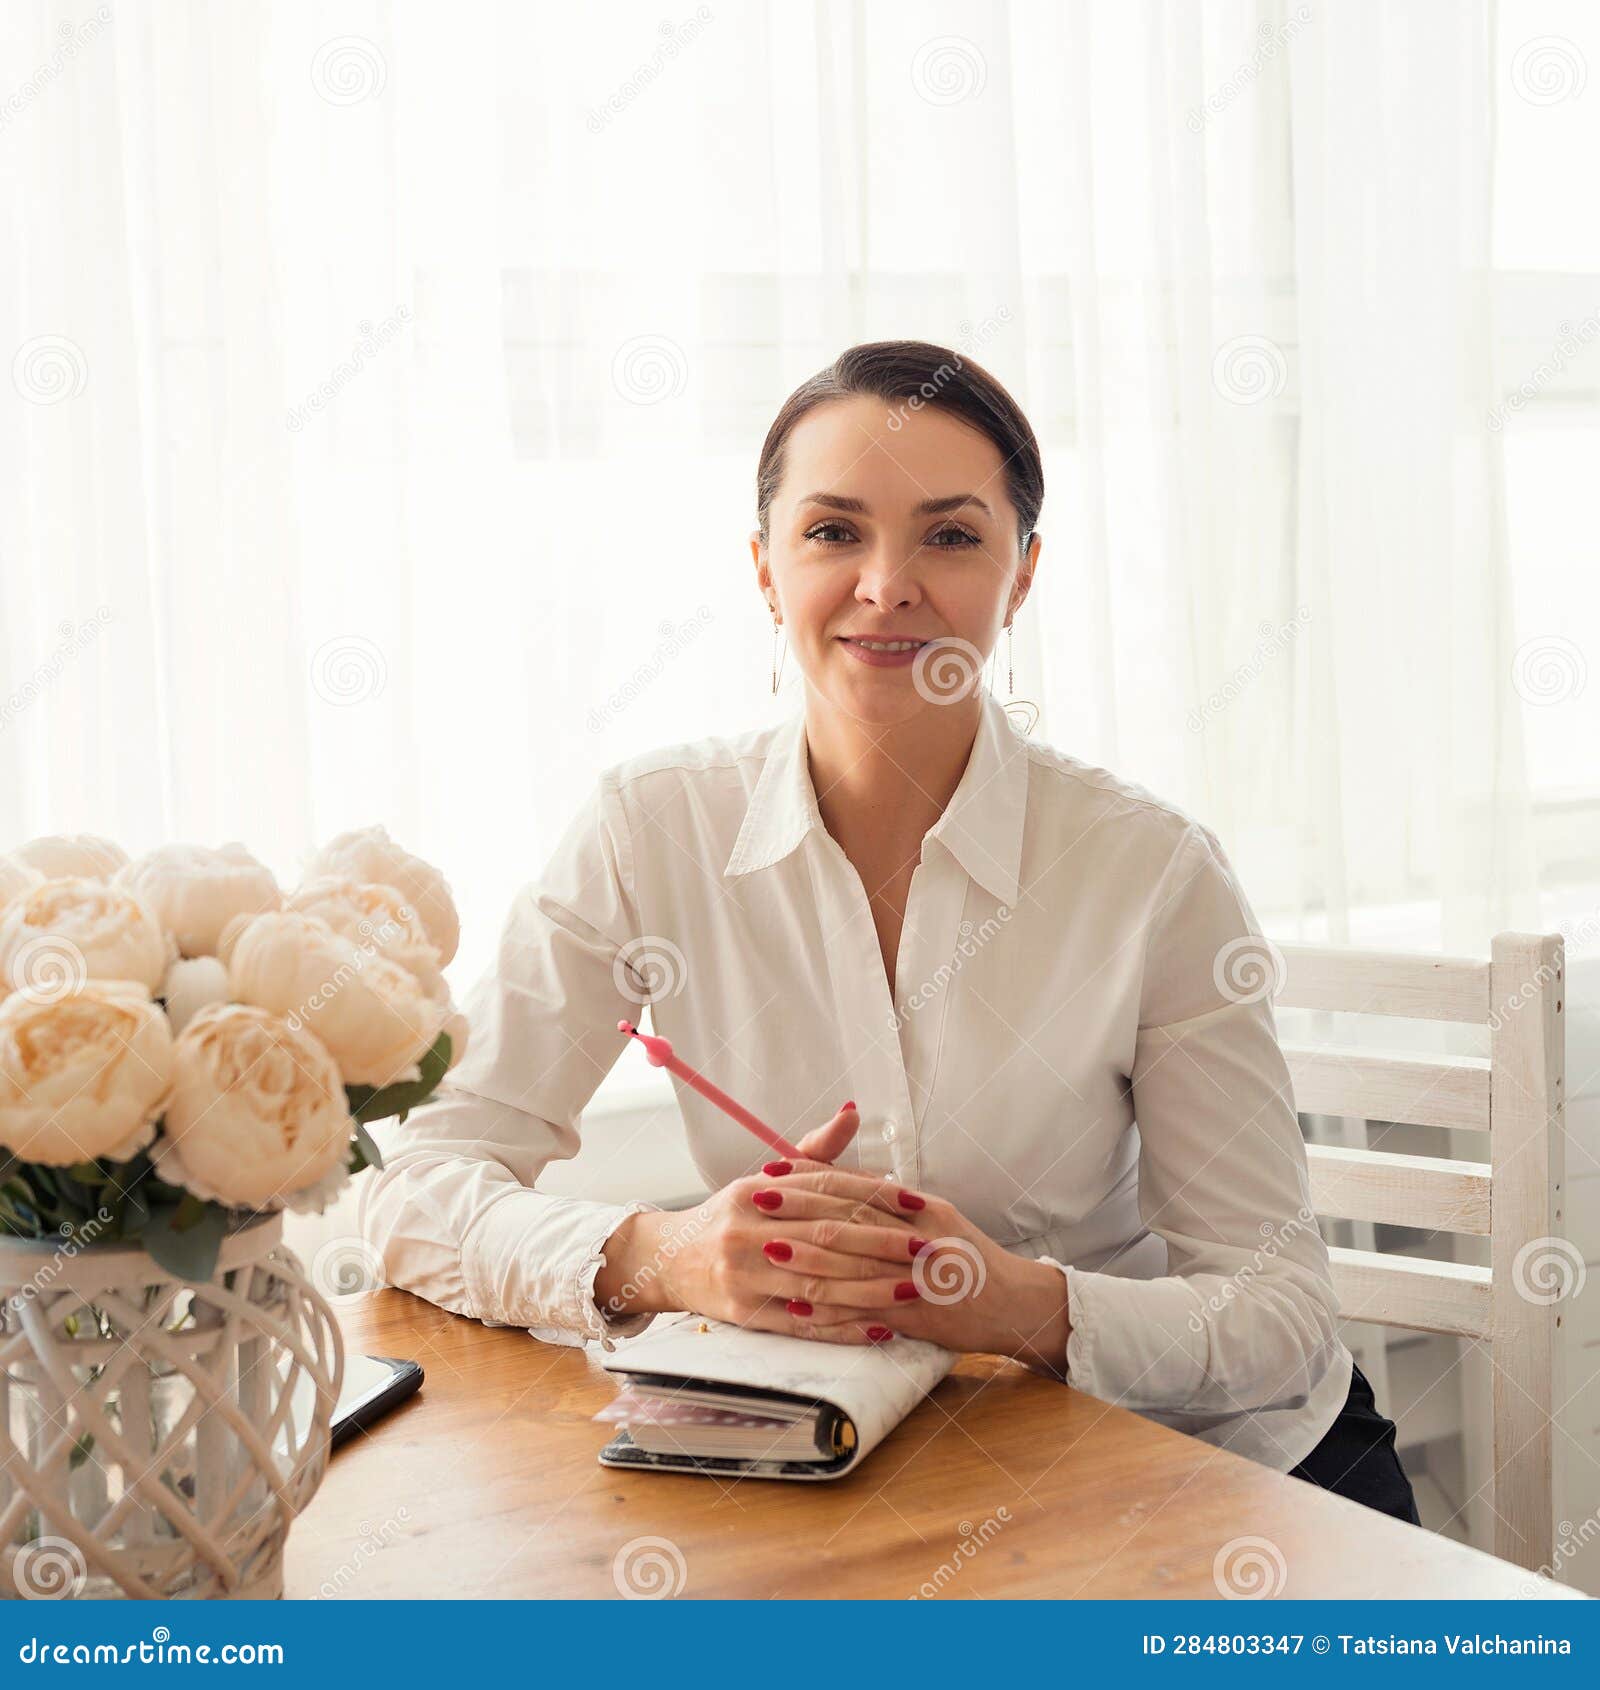 portrait of a smiling businesswoman sitting at a table with a notebook and a pen